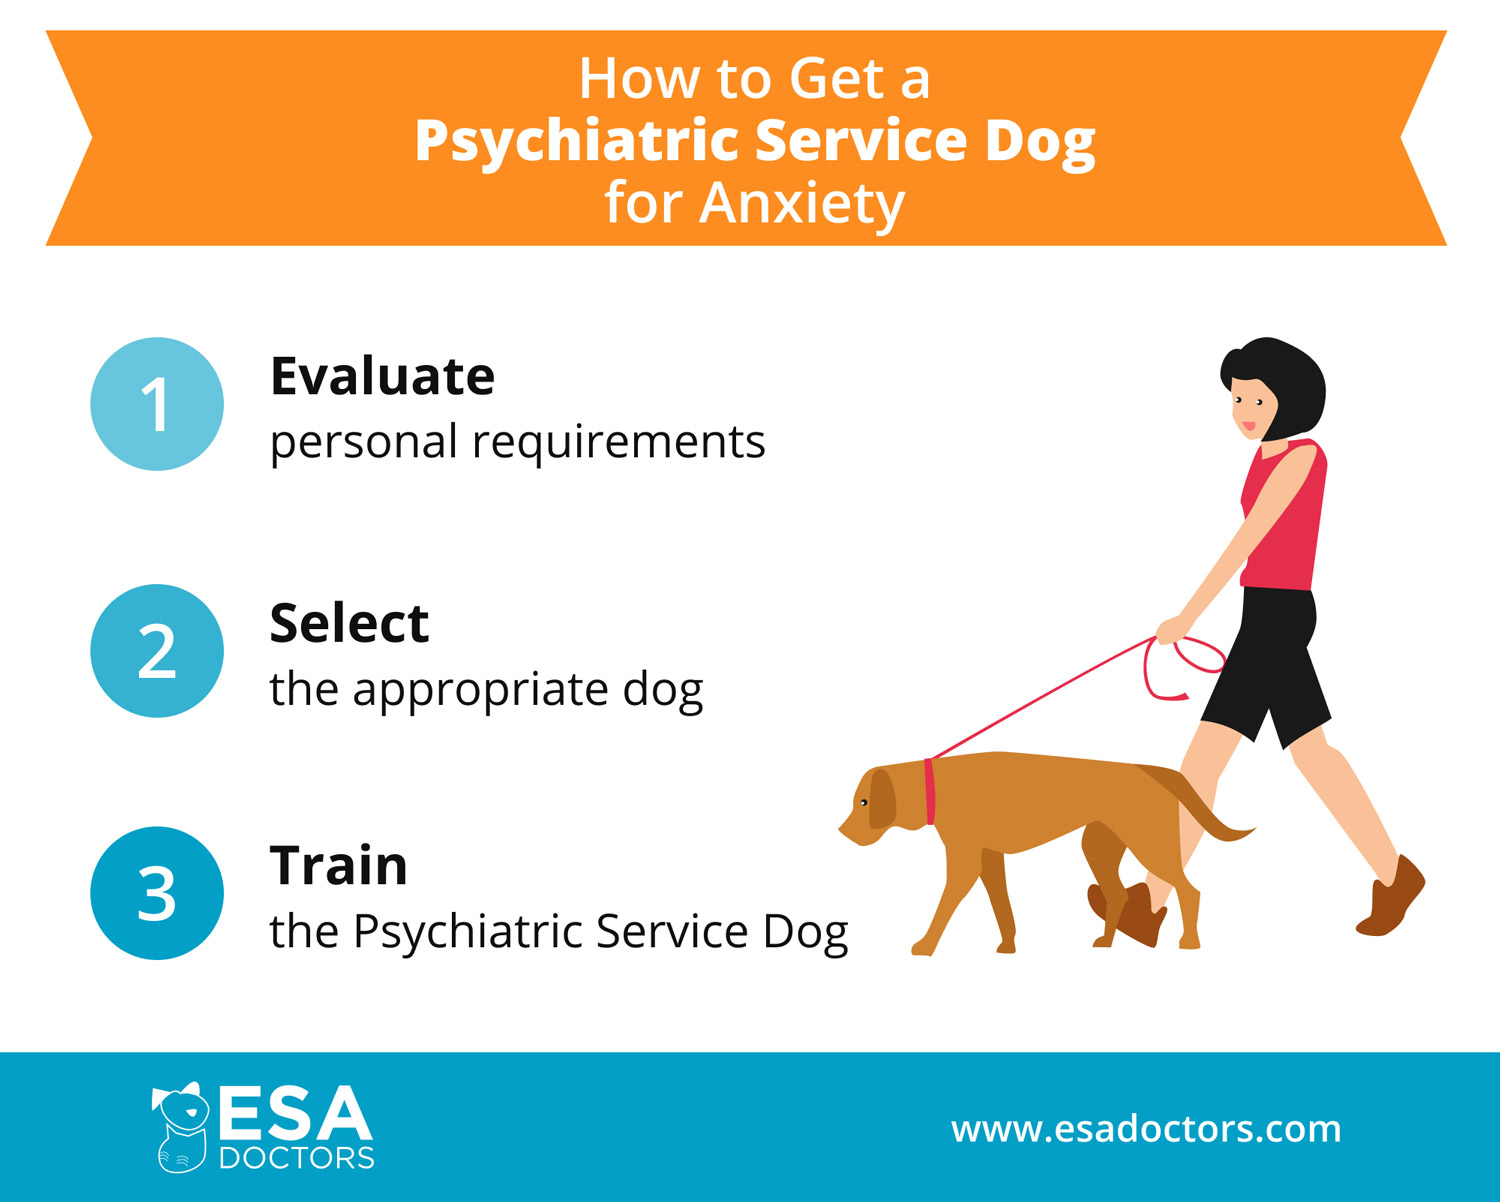 To get a PSD for anxiety, evaluate personal requirements, select dog and train dog